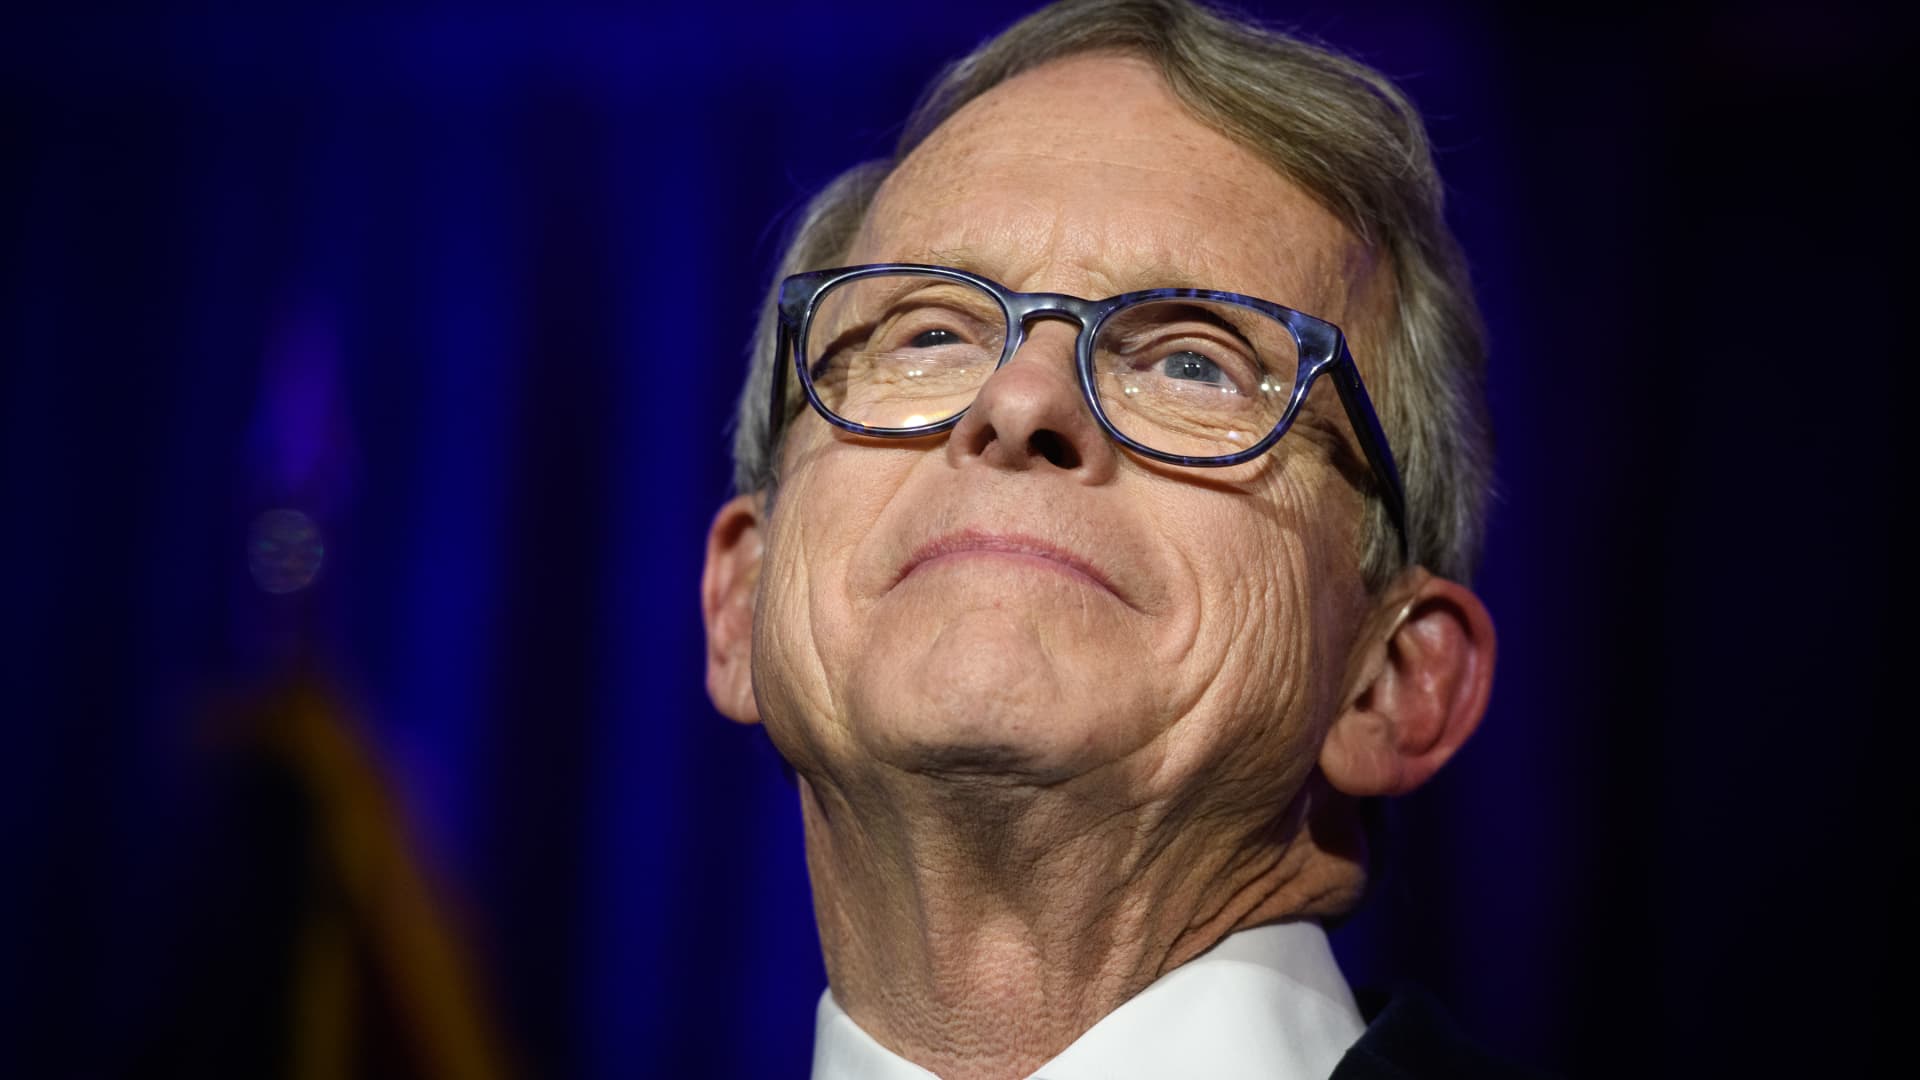 Ohio Governor DeWine says Intel delay on $20 billion chip plant is about 'leverage'